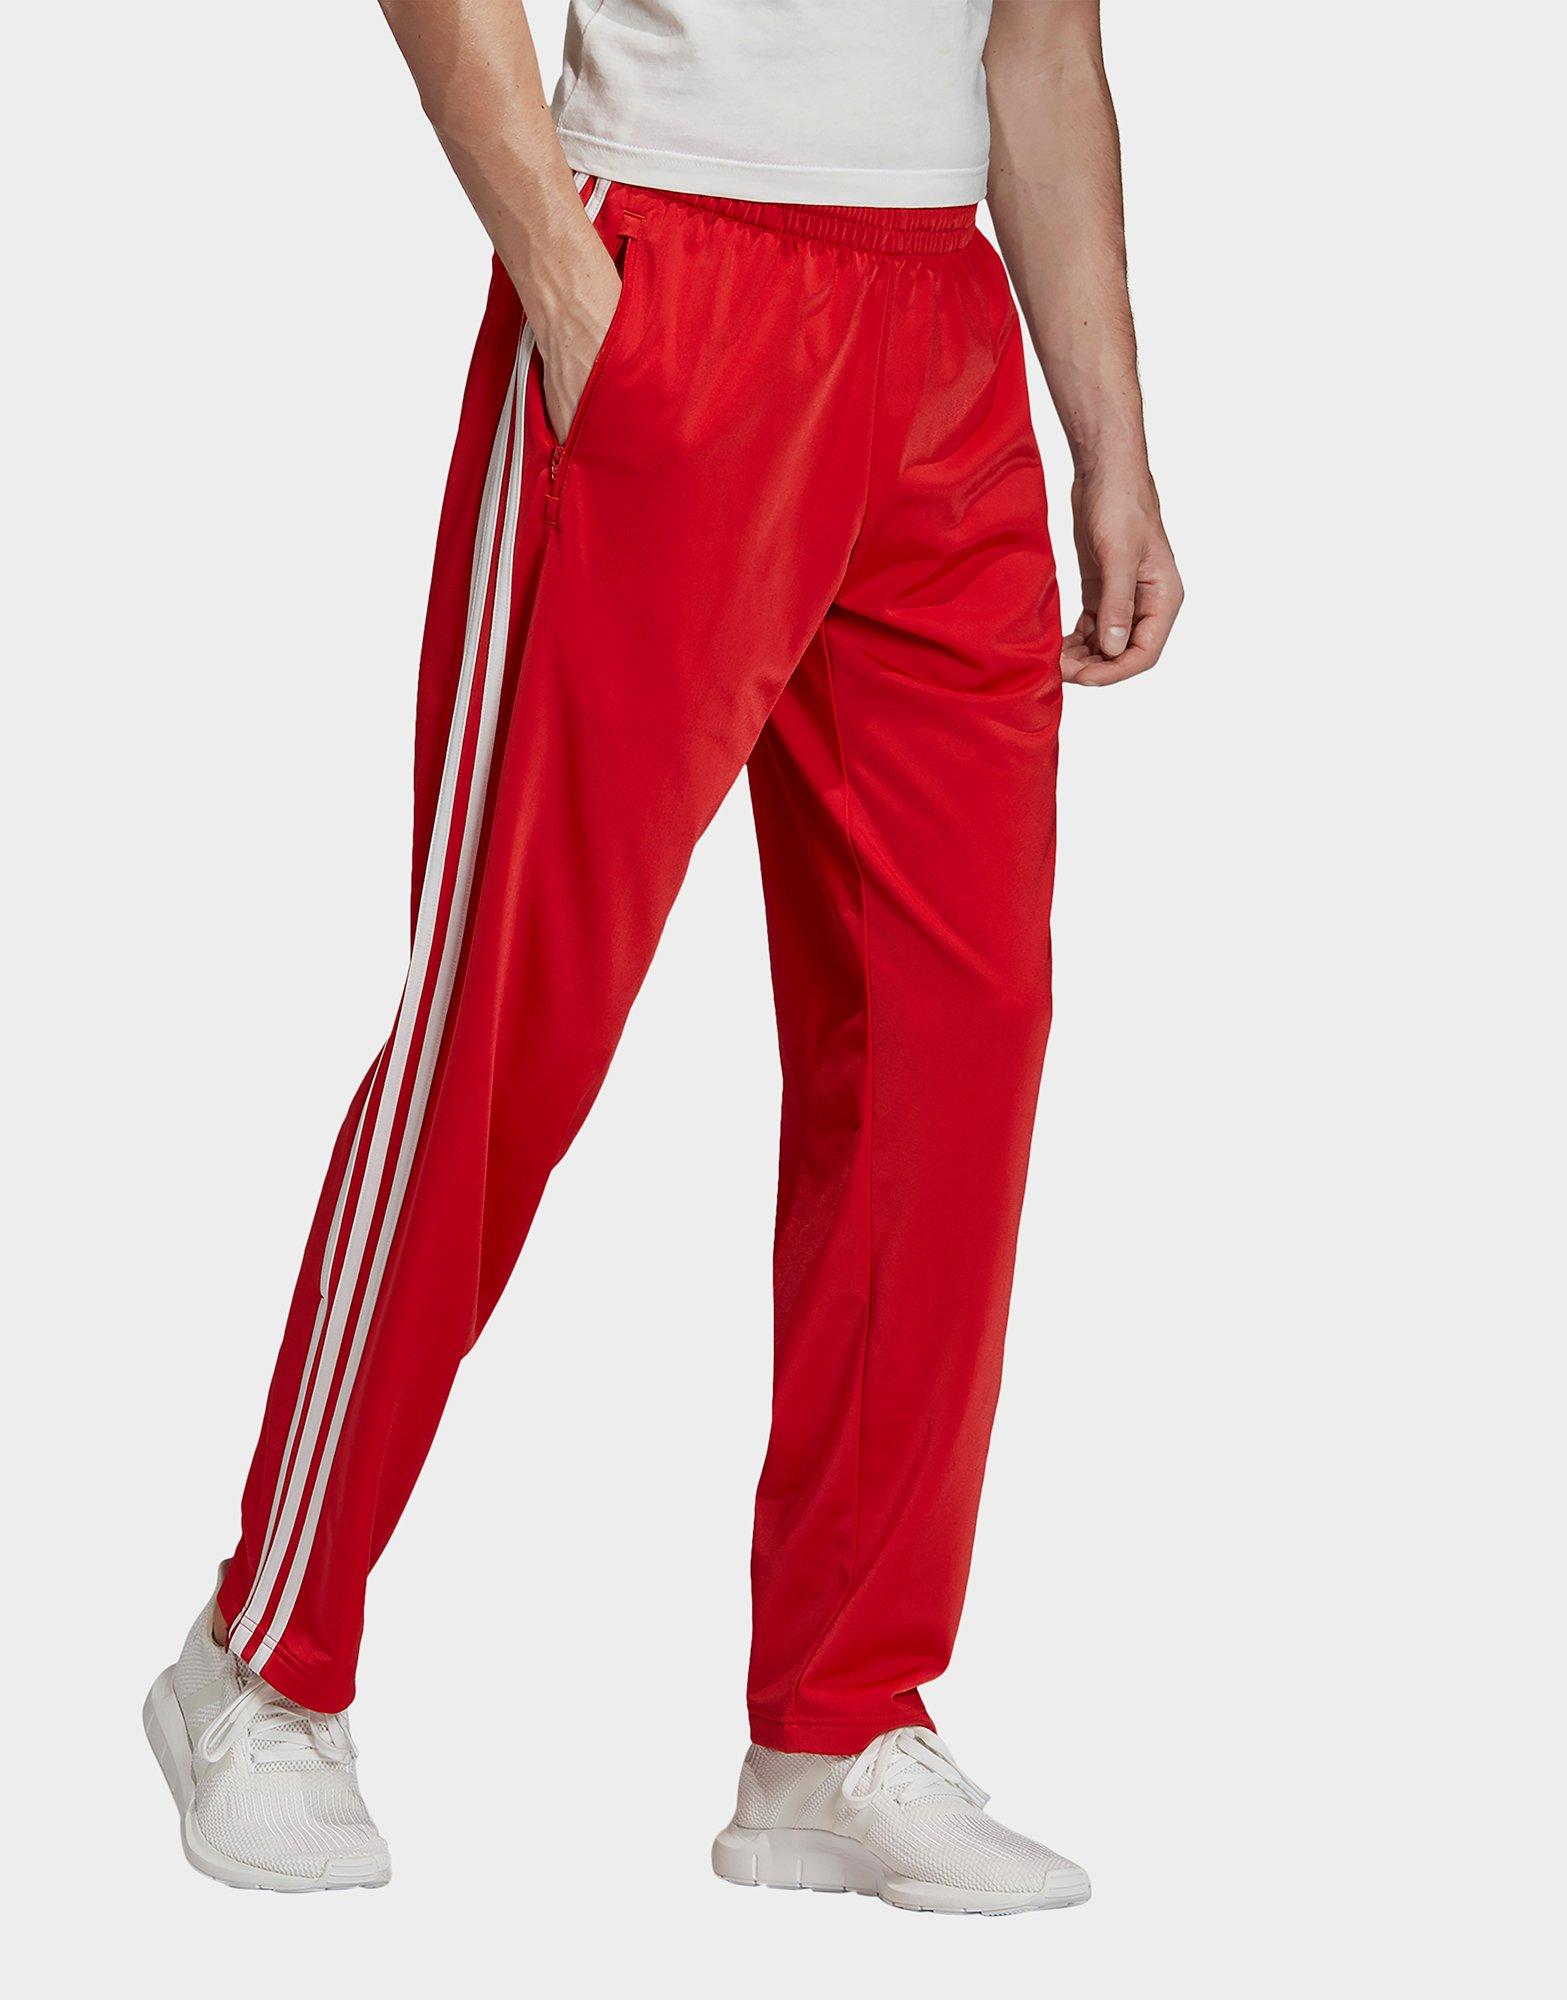 grey and red adidas tracksuit bottoms